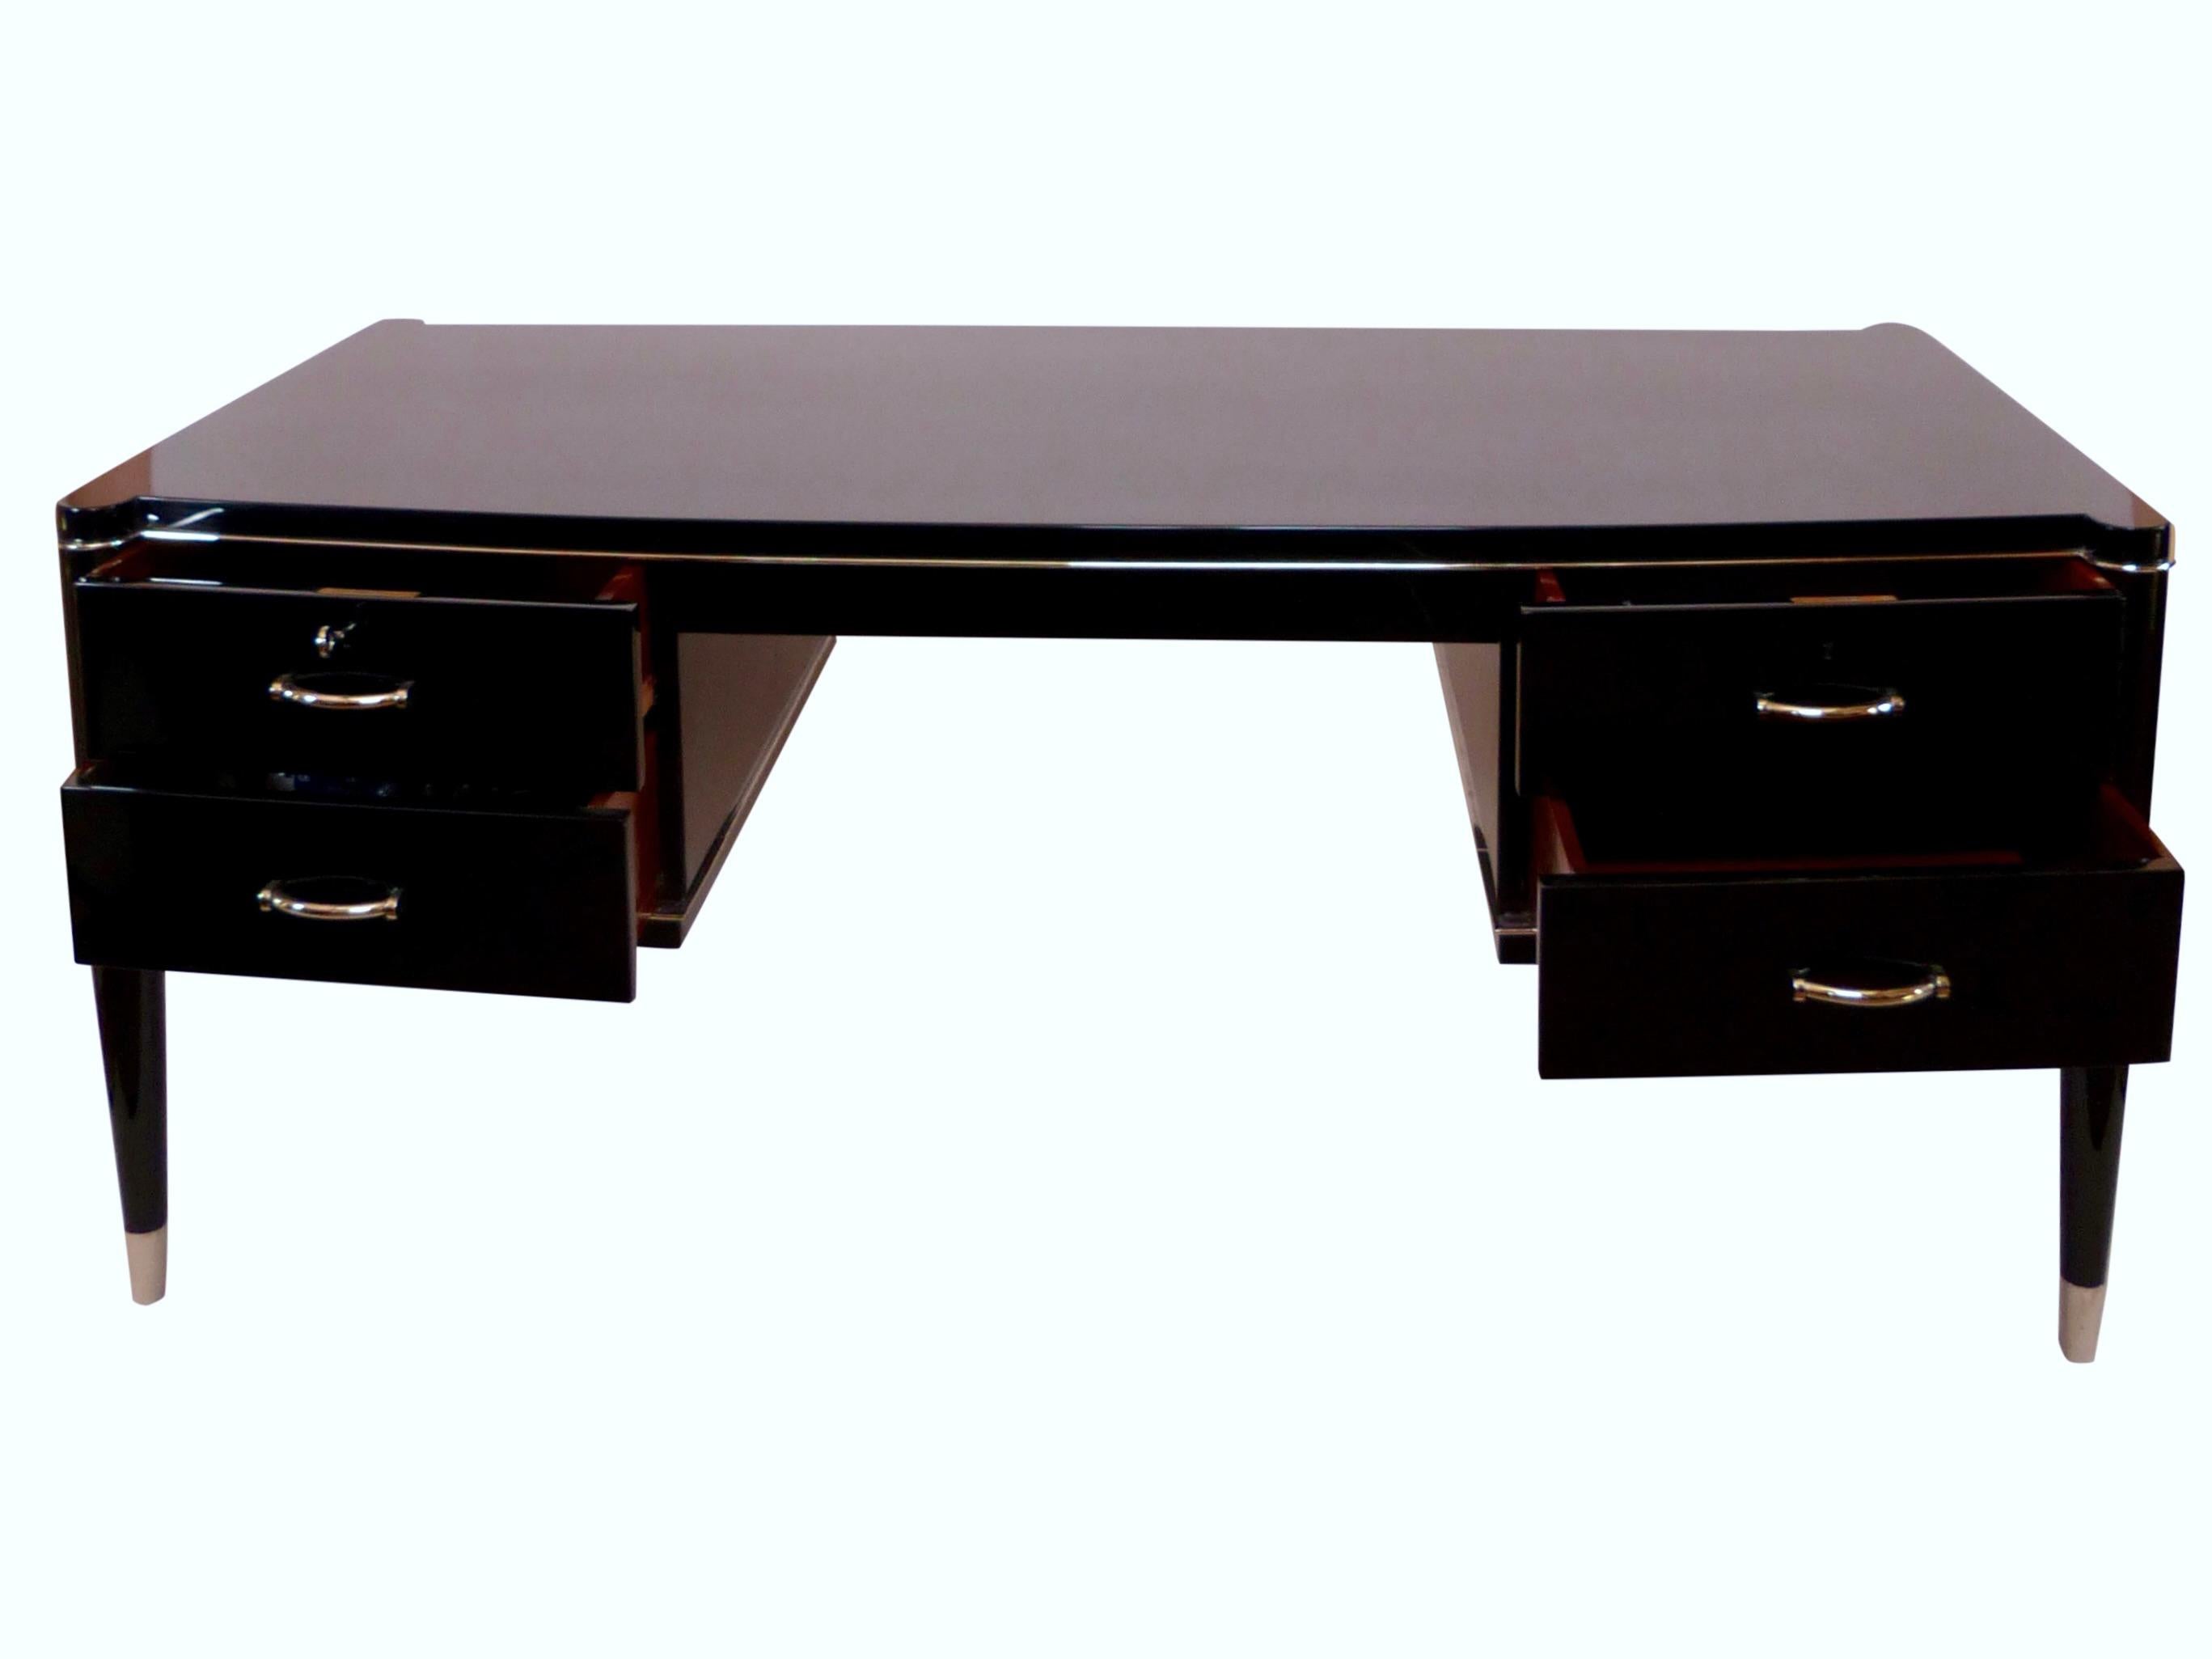 Desk from the Belgian Furniture Manufactory DeCoene Frères. 
Double Face desk for the boss on one side and the secretary on the other
Well known Art Déco Furniture, Belgium 1940s 

Fresh Black Piano Lacquer 
All Metal Applications ORIGINAL!!!